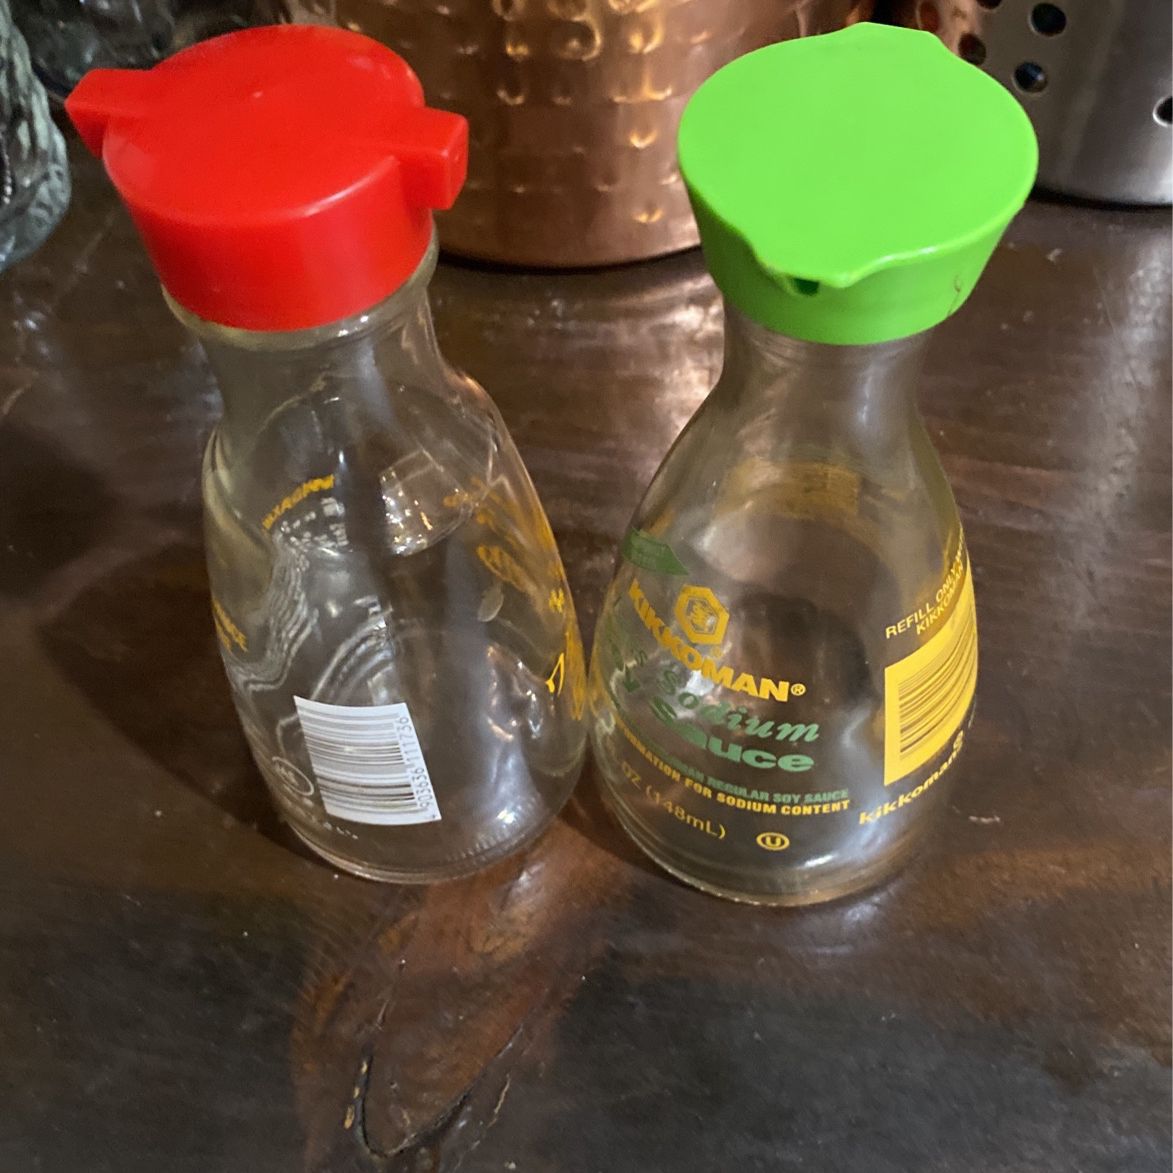 Used Soy Sauce Bottles Red And Green Caps